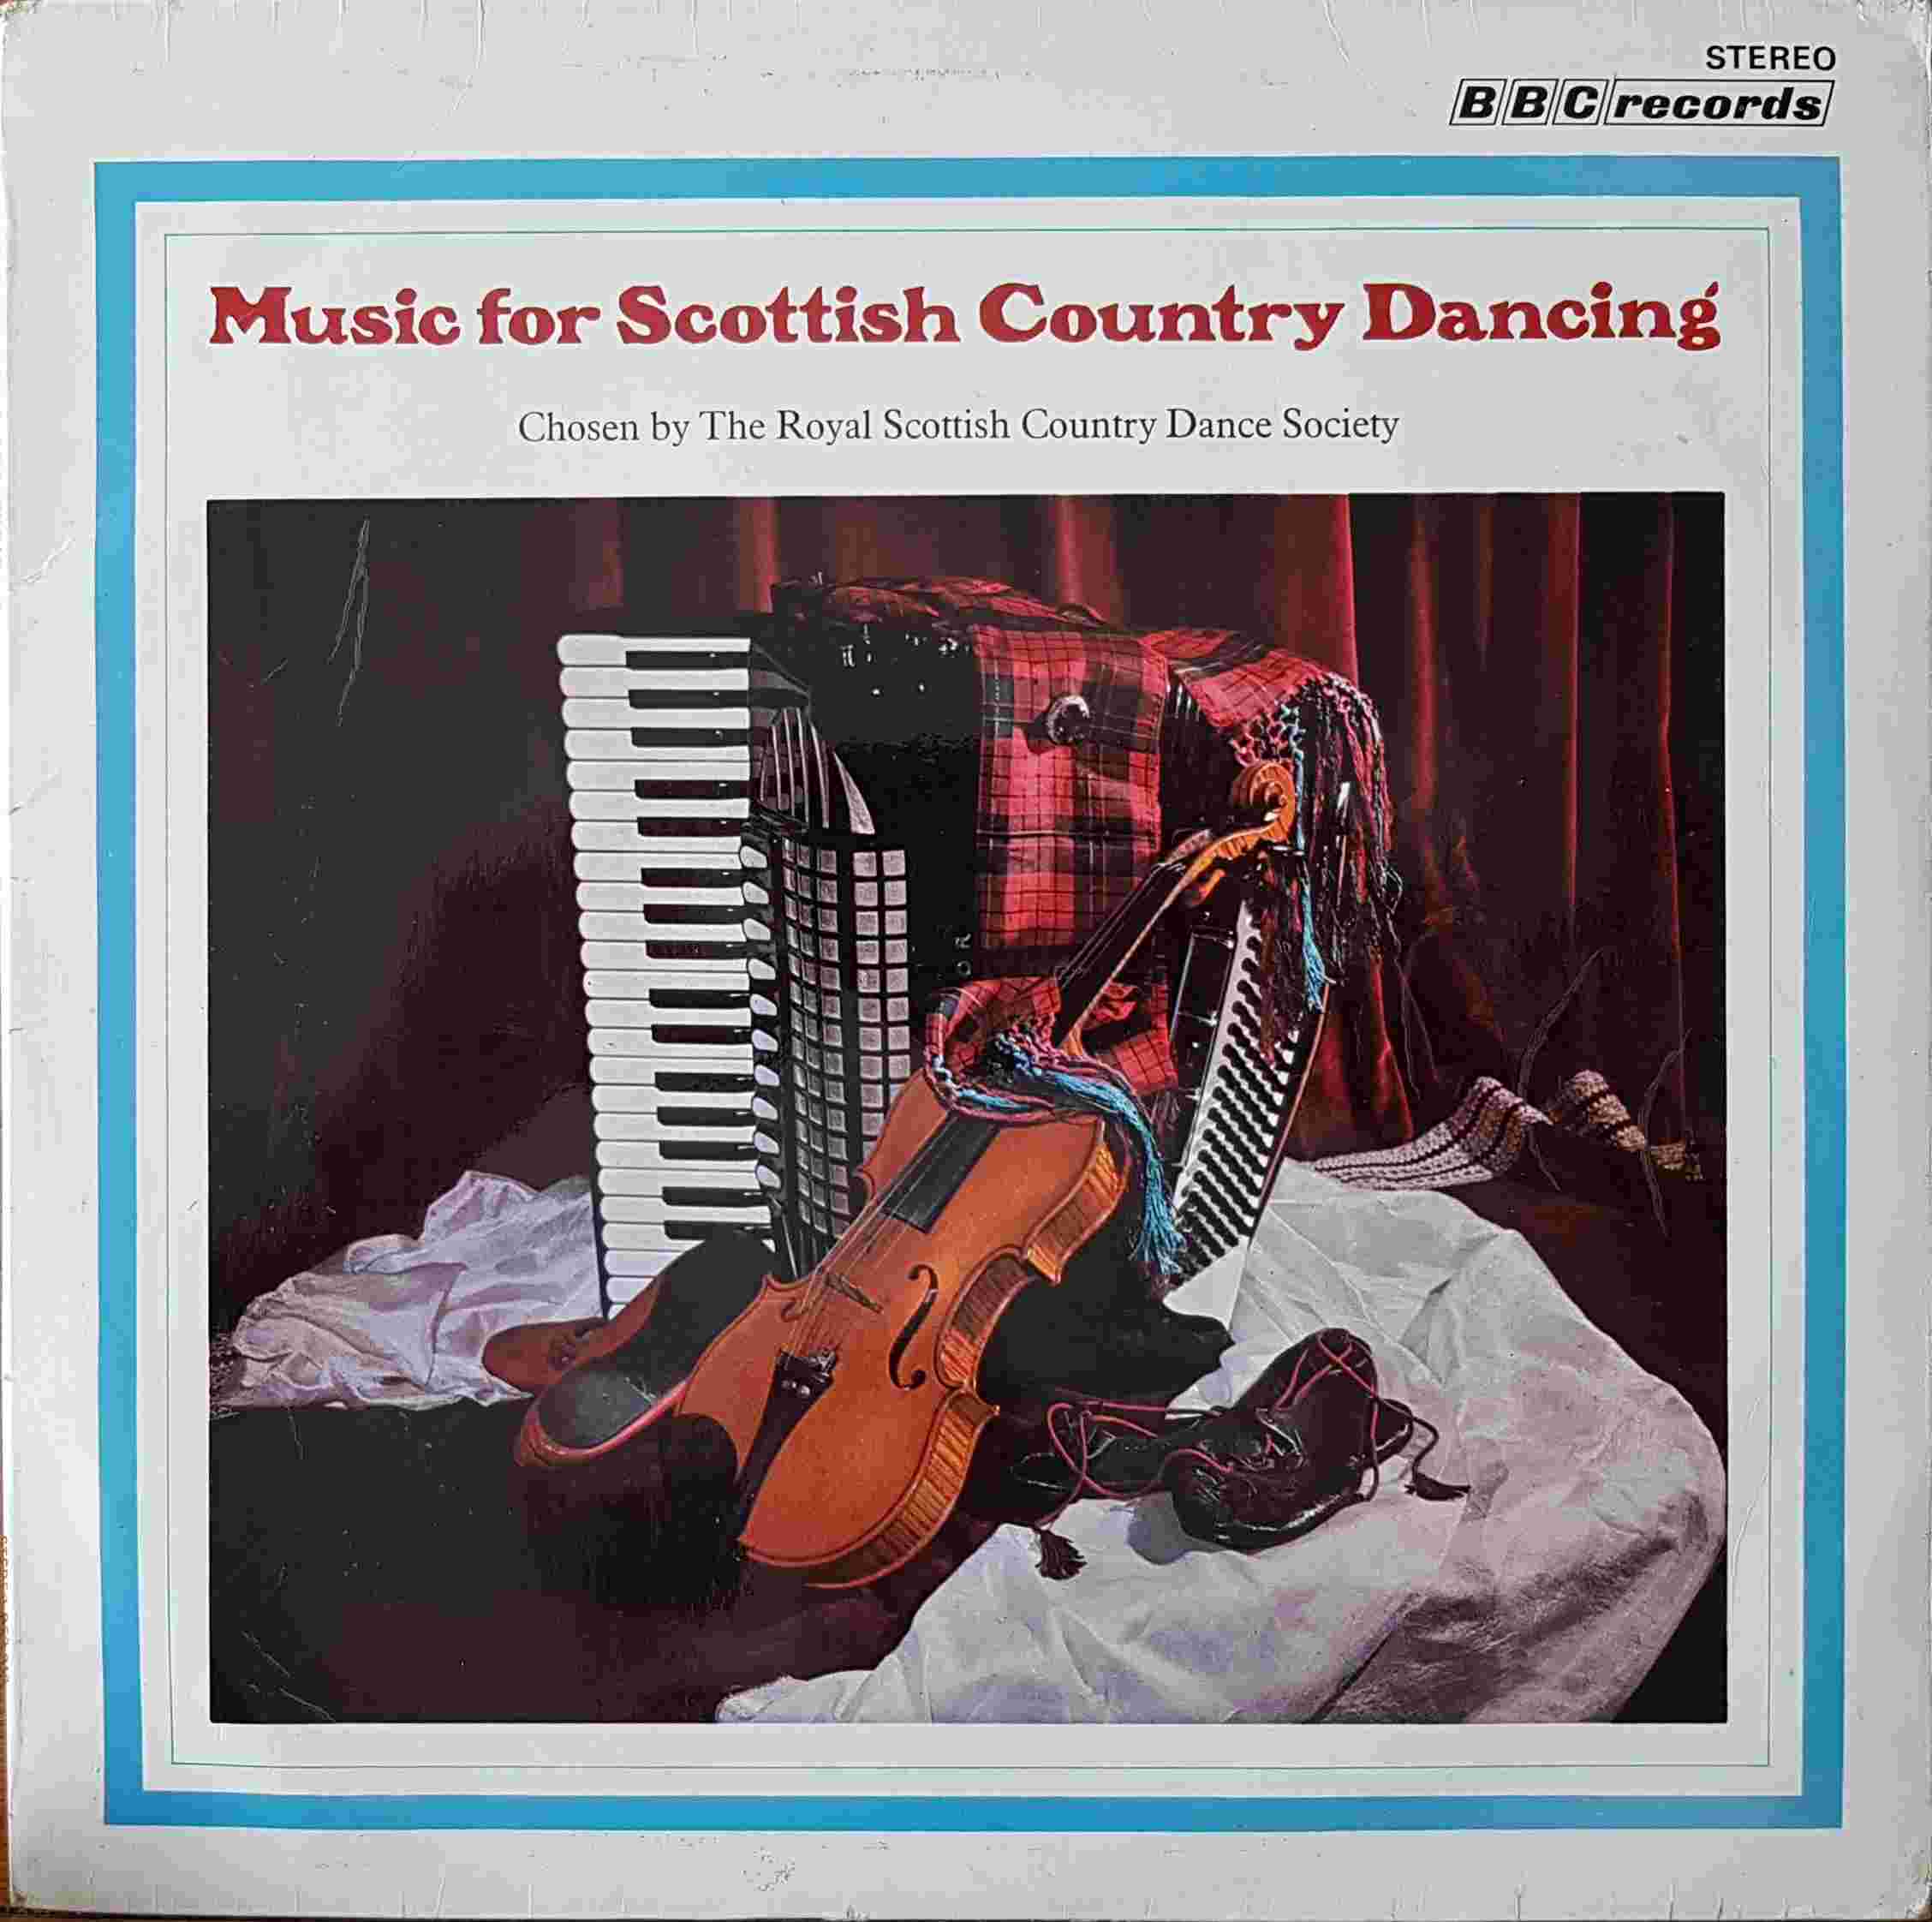 Picture of REC 94 Music for Scottish country dancing by artist Various from the BBC albums - Records and Tapes library